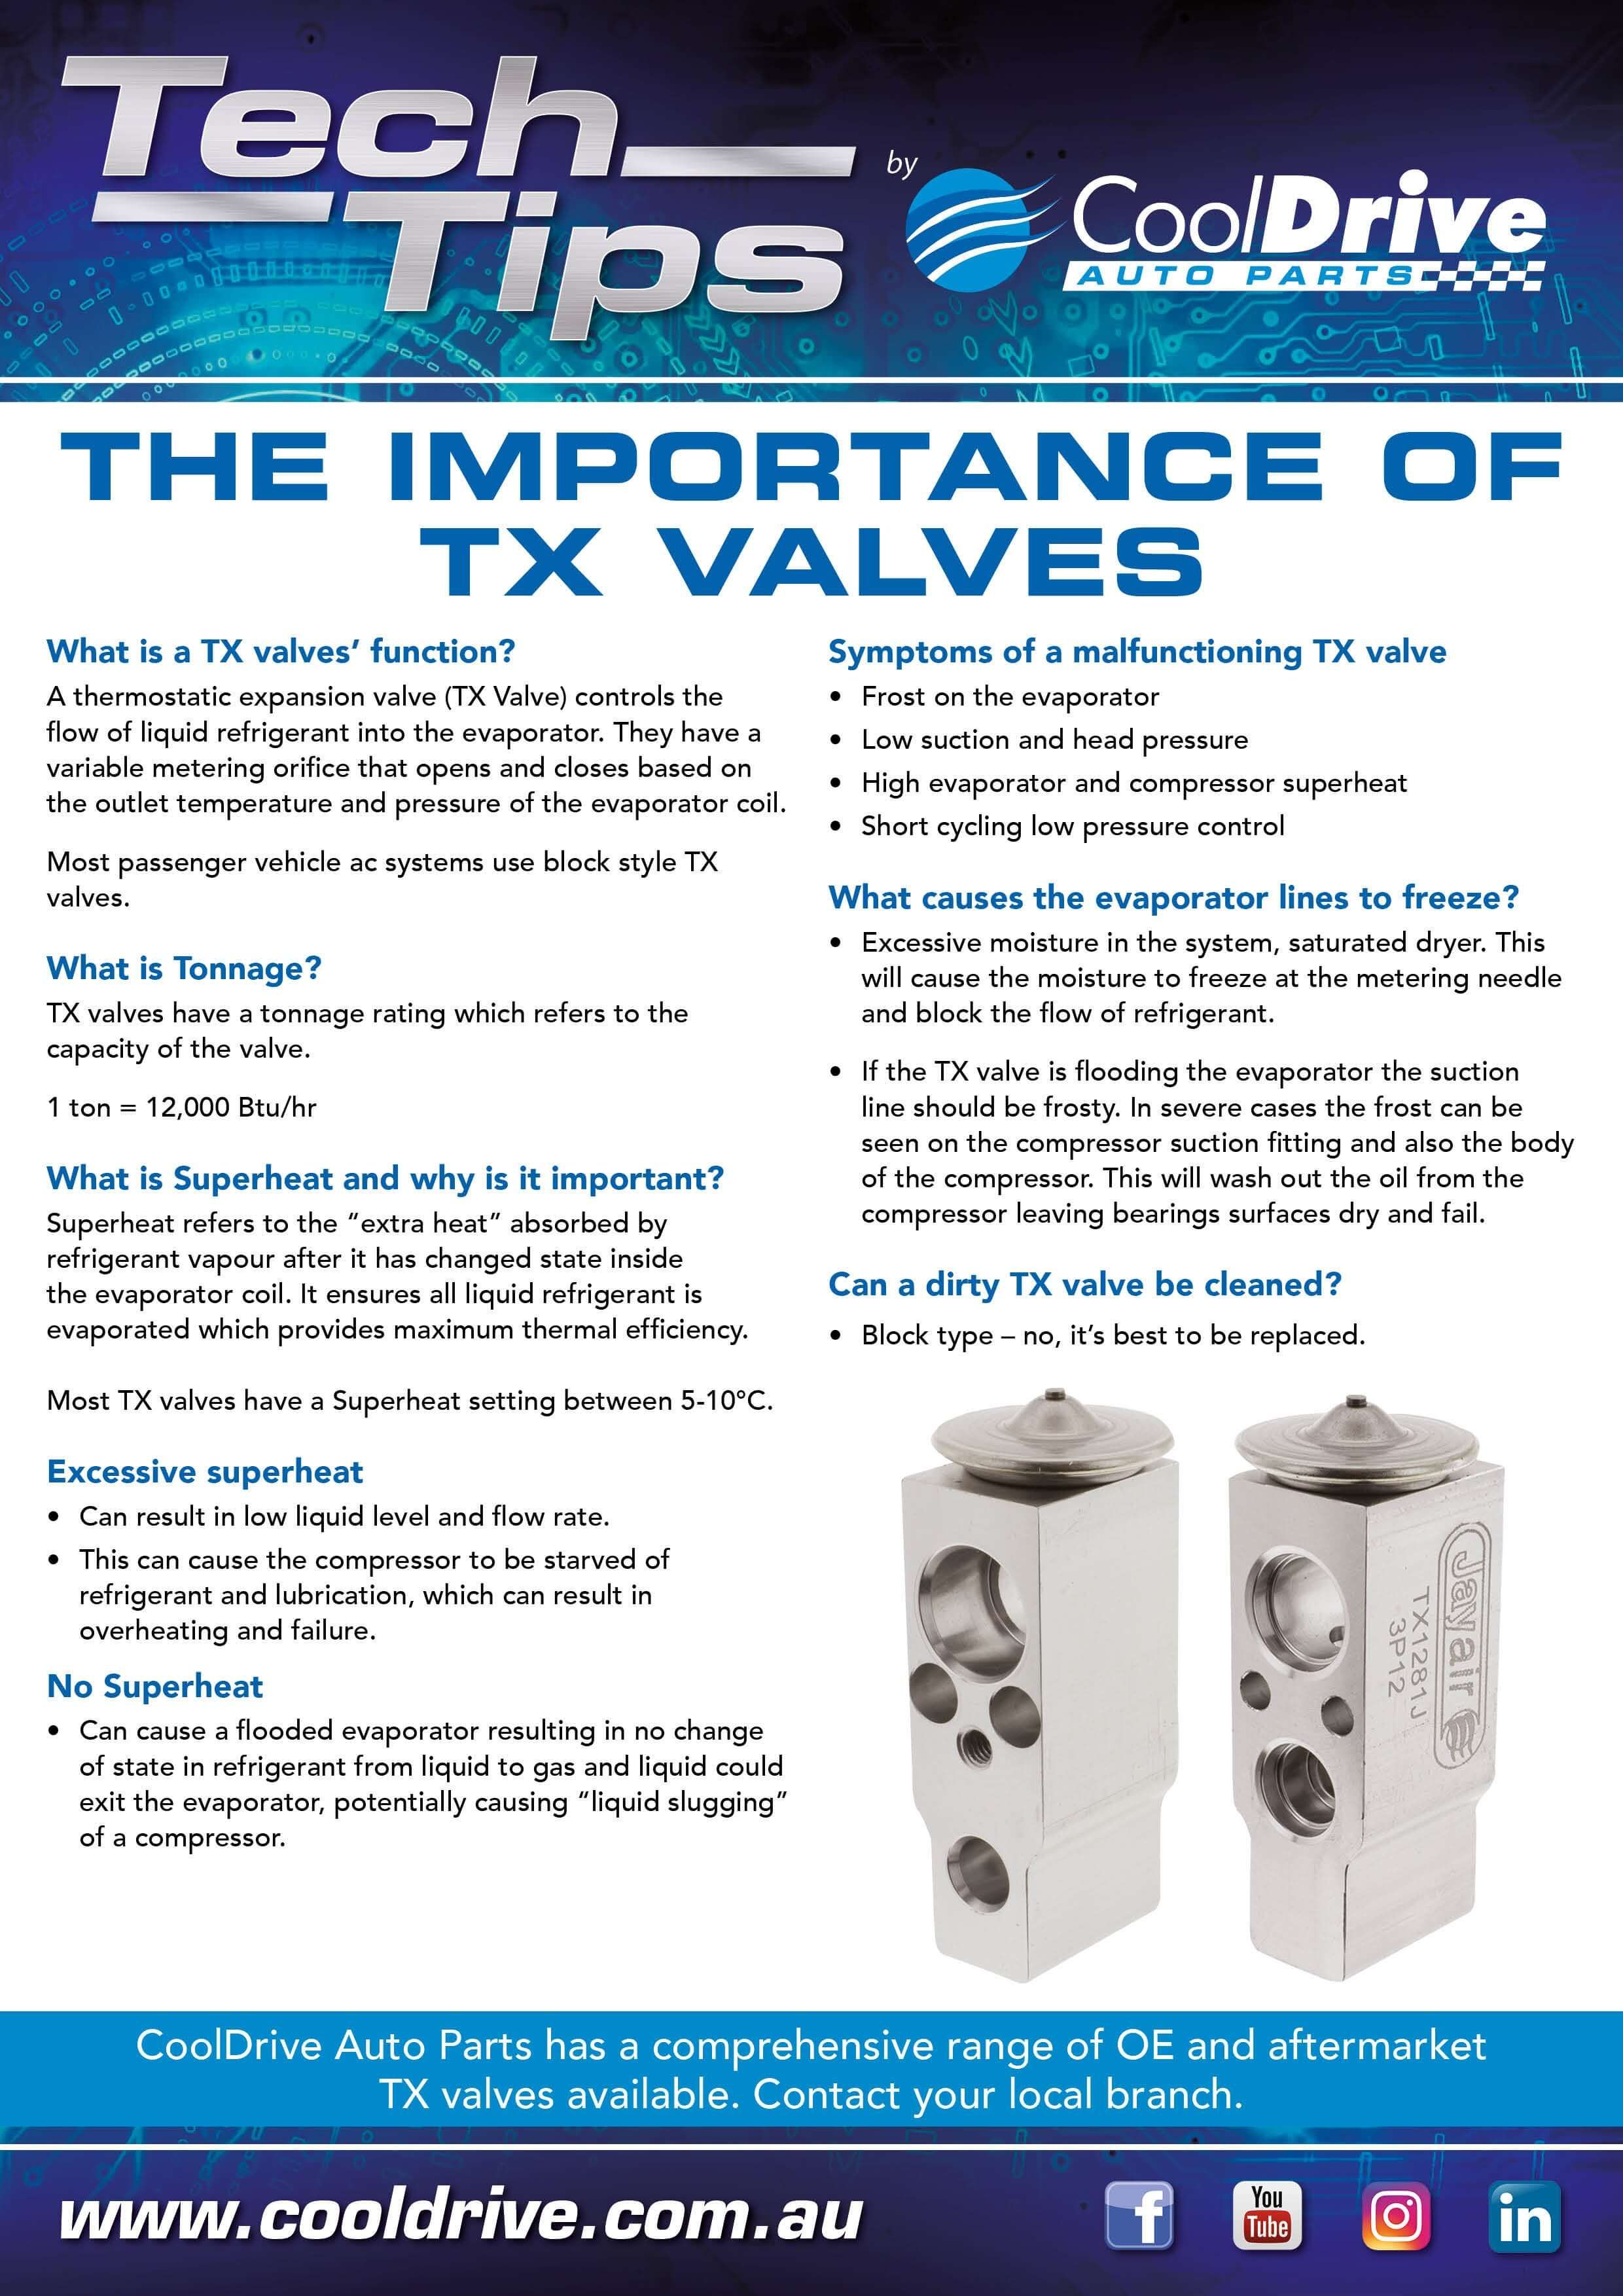 Tech Tips - The Importance of TX Valves